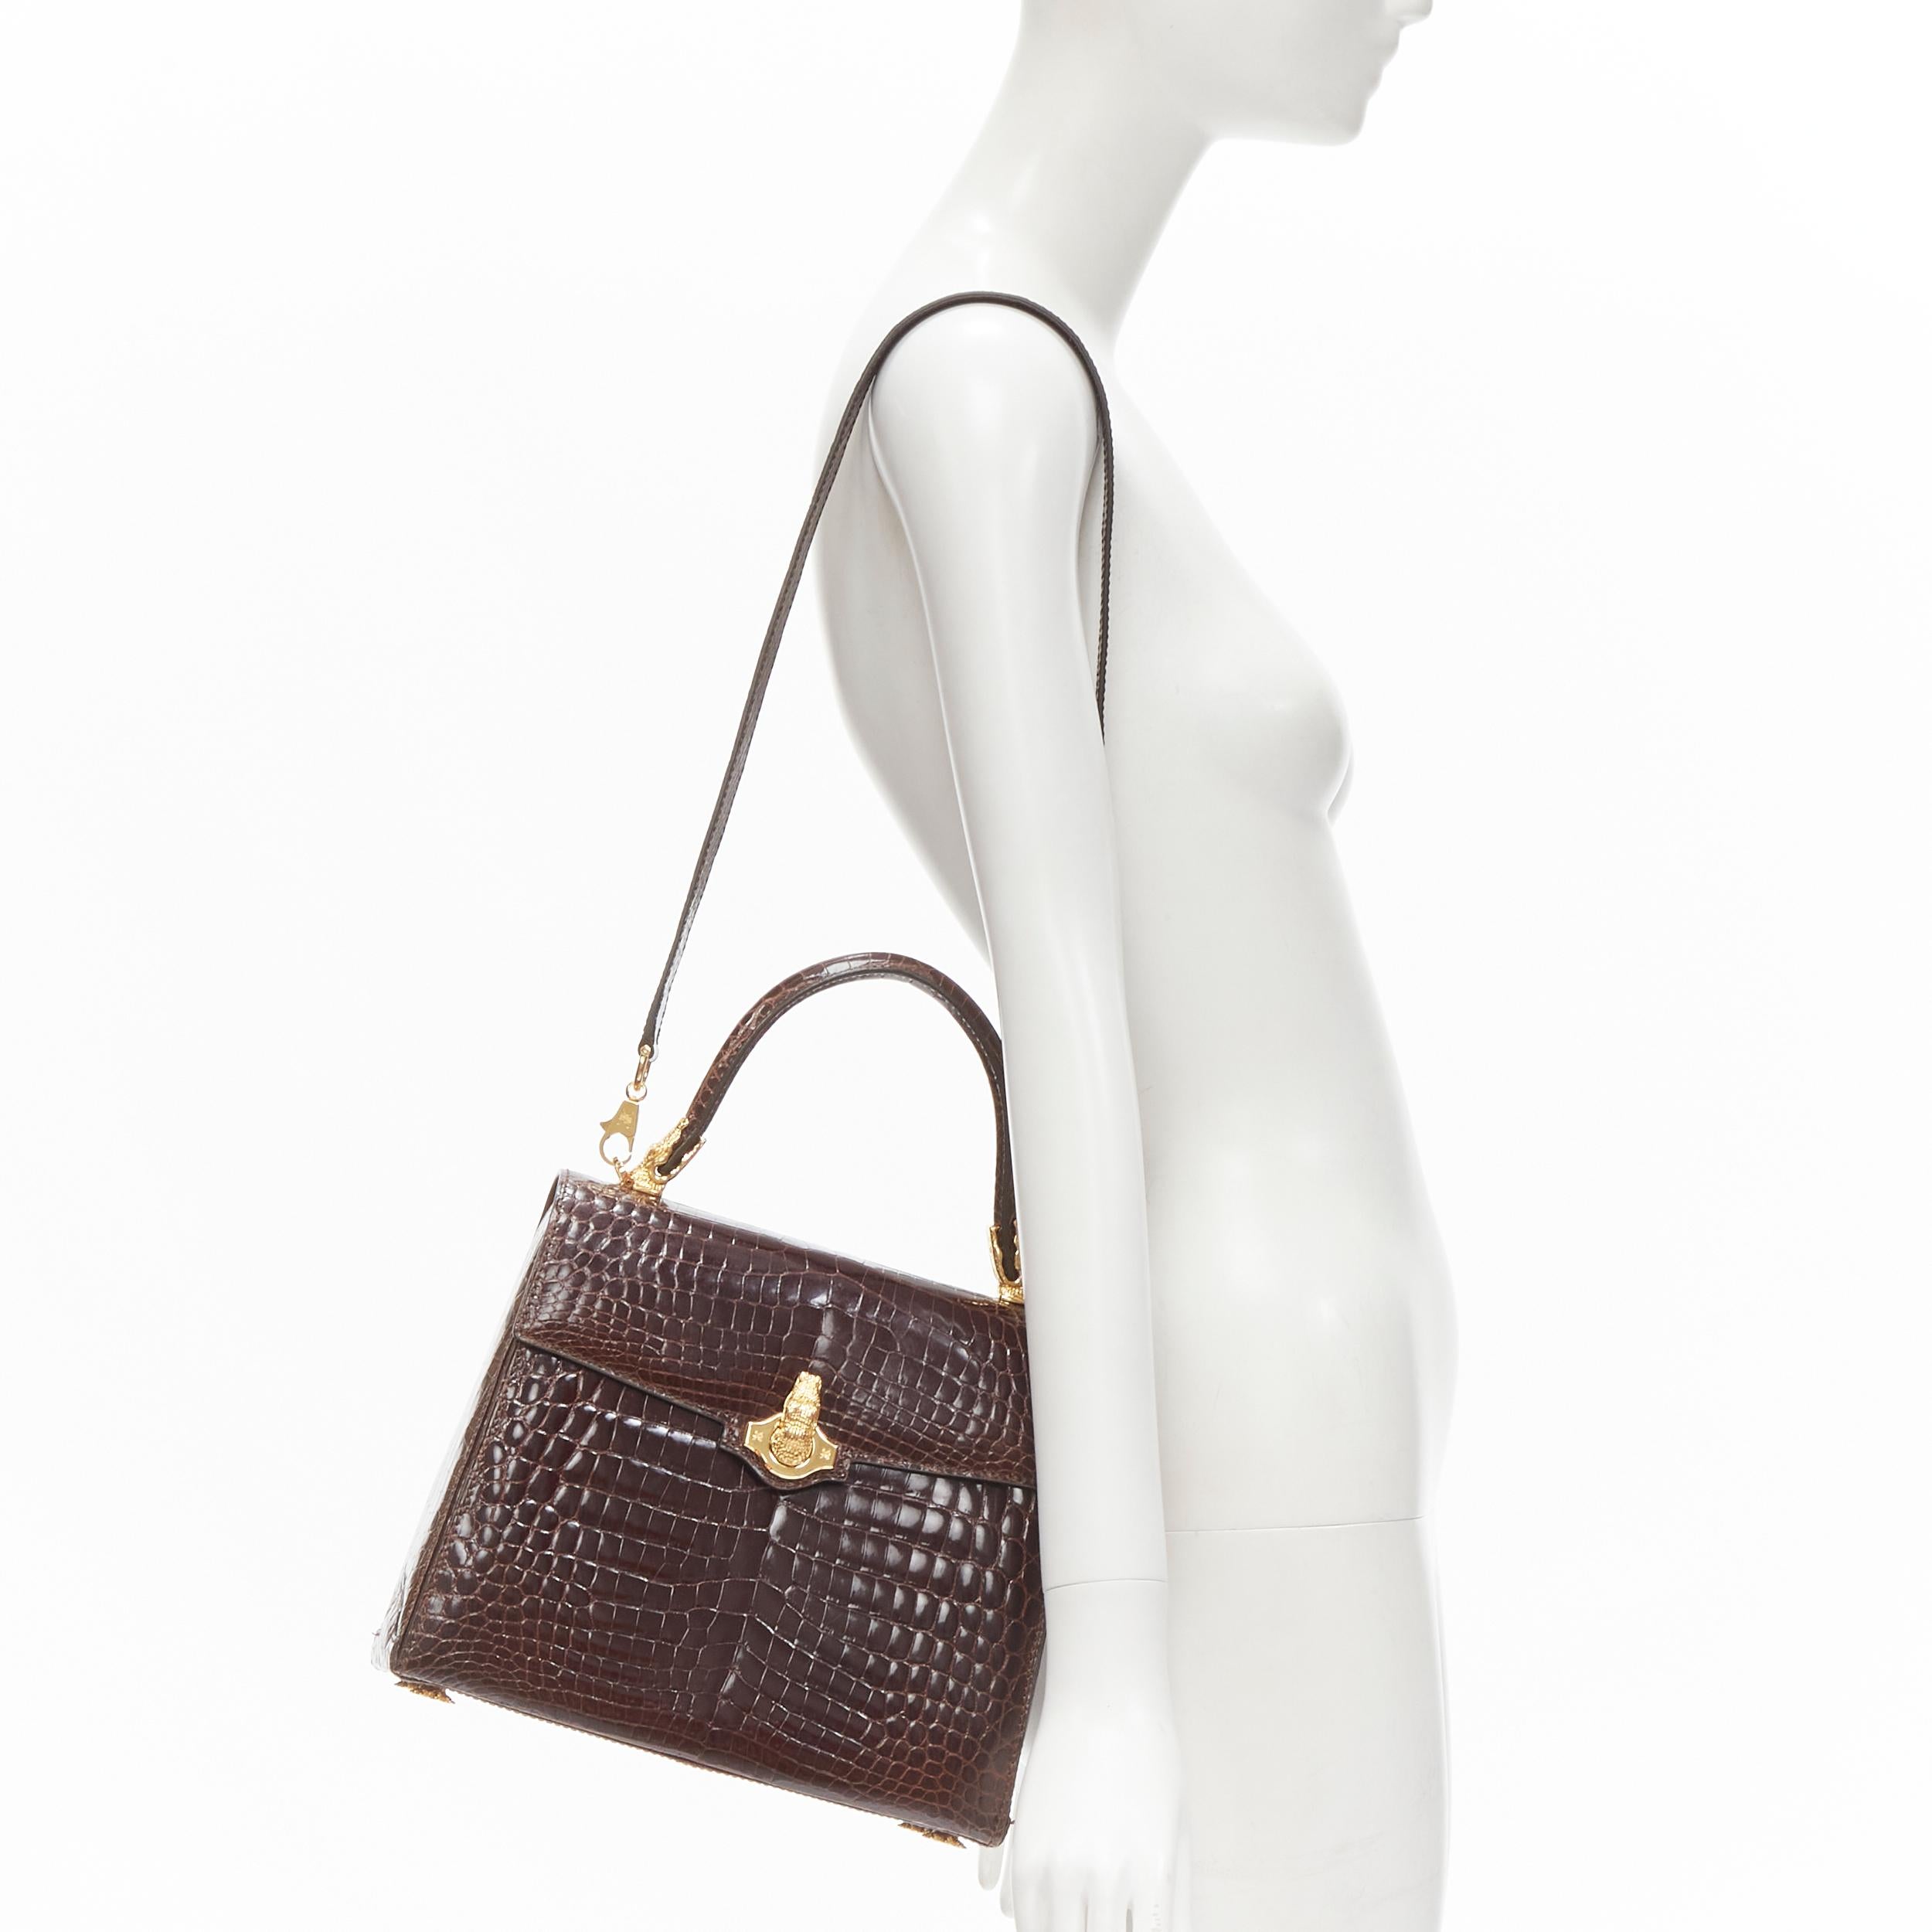 KWANPEN brown polished leather gold croc hardware buckle crossbody satchel bag 
Reference: ANWU/A00015 
Brand: Kwanpen 
Material: Leather 
Color: Brown 
Pattern: Solid 
Closure: Turnlock 
Extra Detail: Polished scaled leather. Gold-tone hardware.